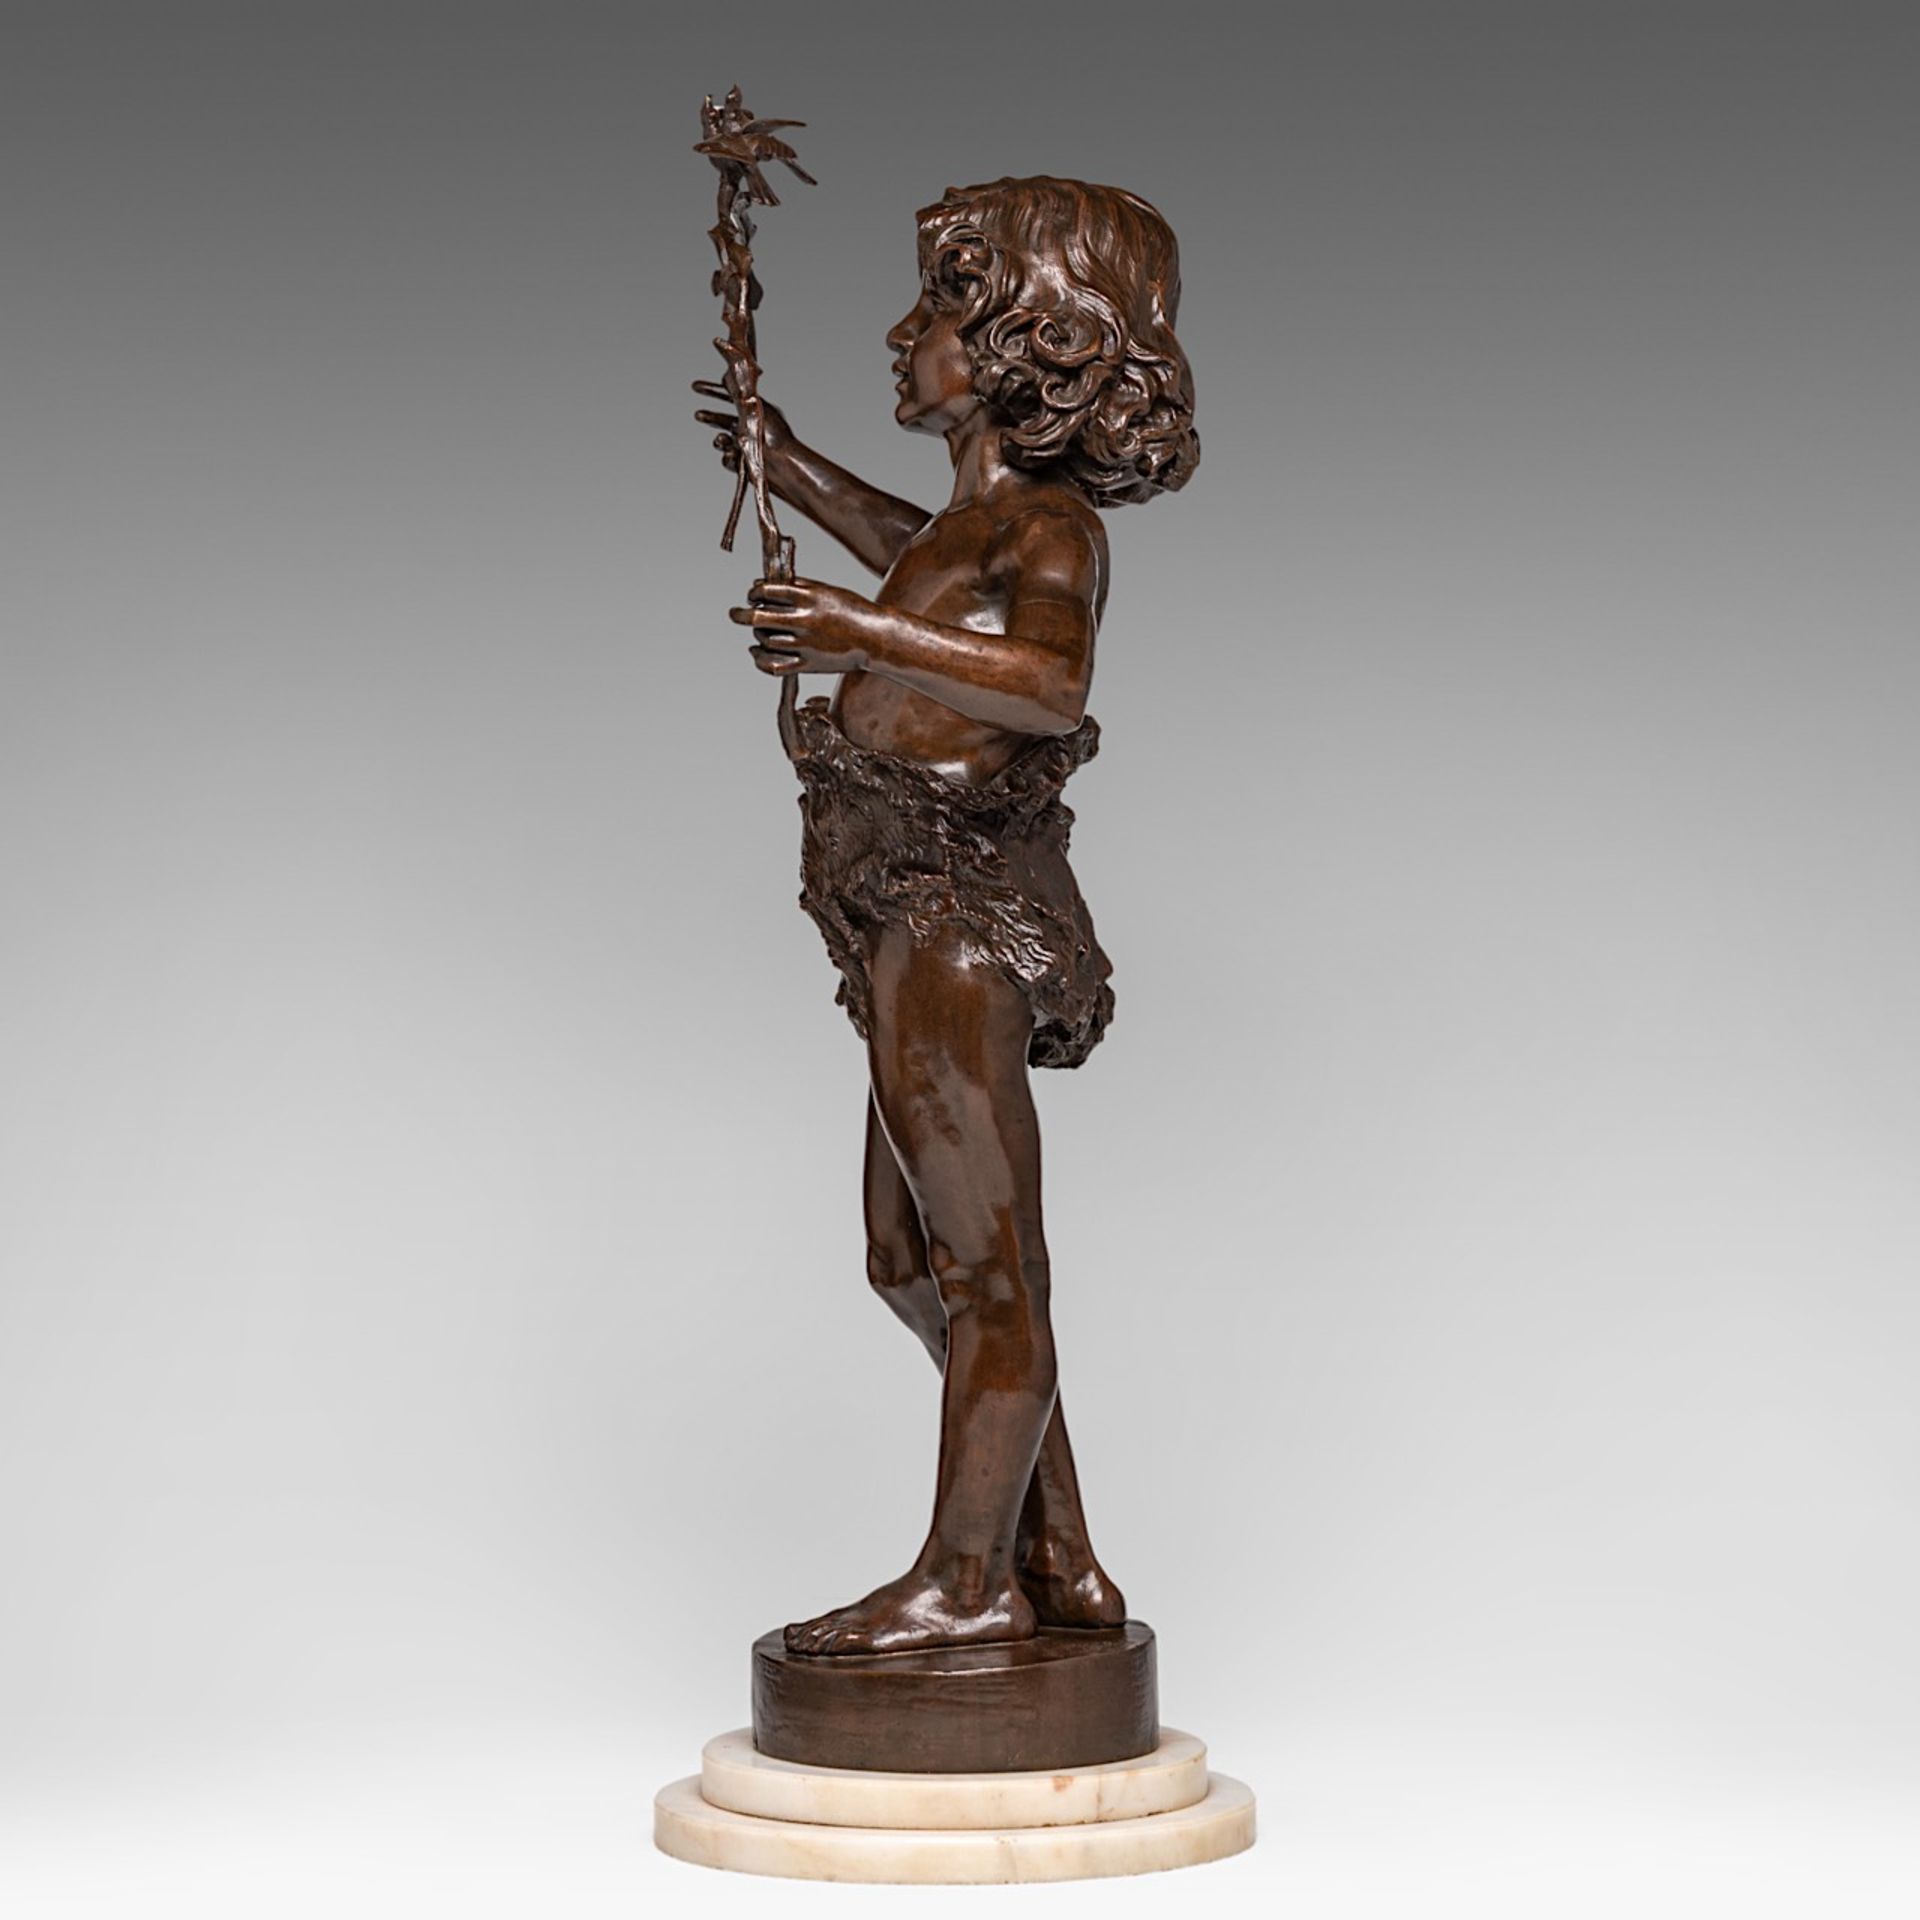 Marcel Debut (1865-1933), boy playing with birds, patinated bronze, H 70 cm - Image 3 of 6